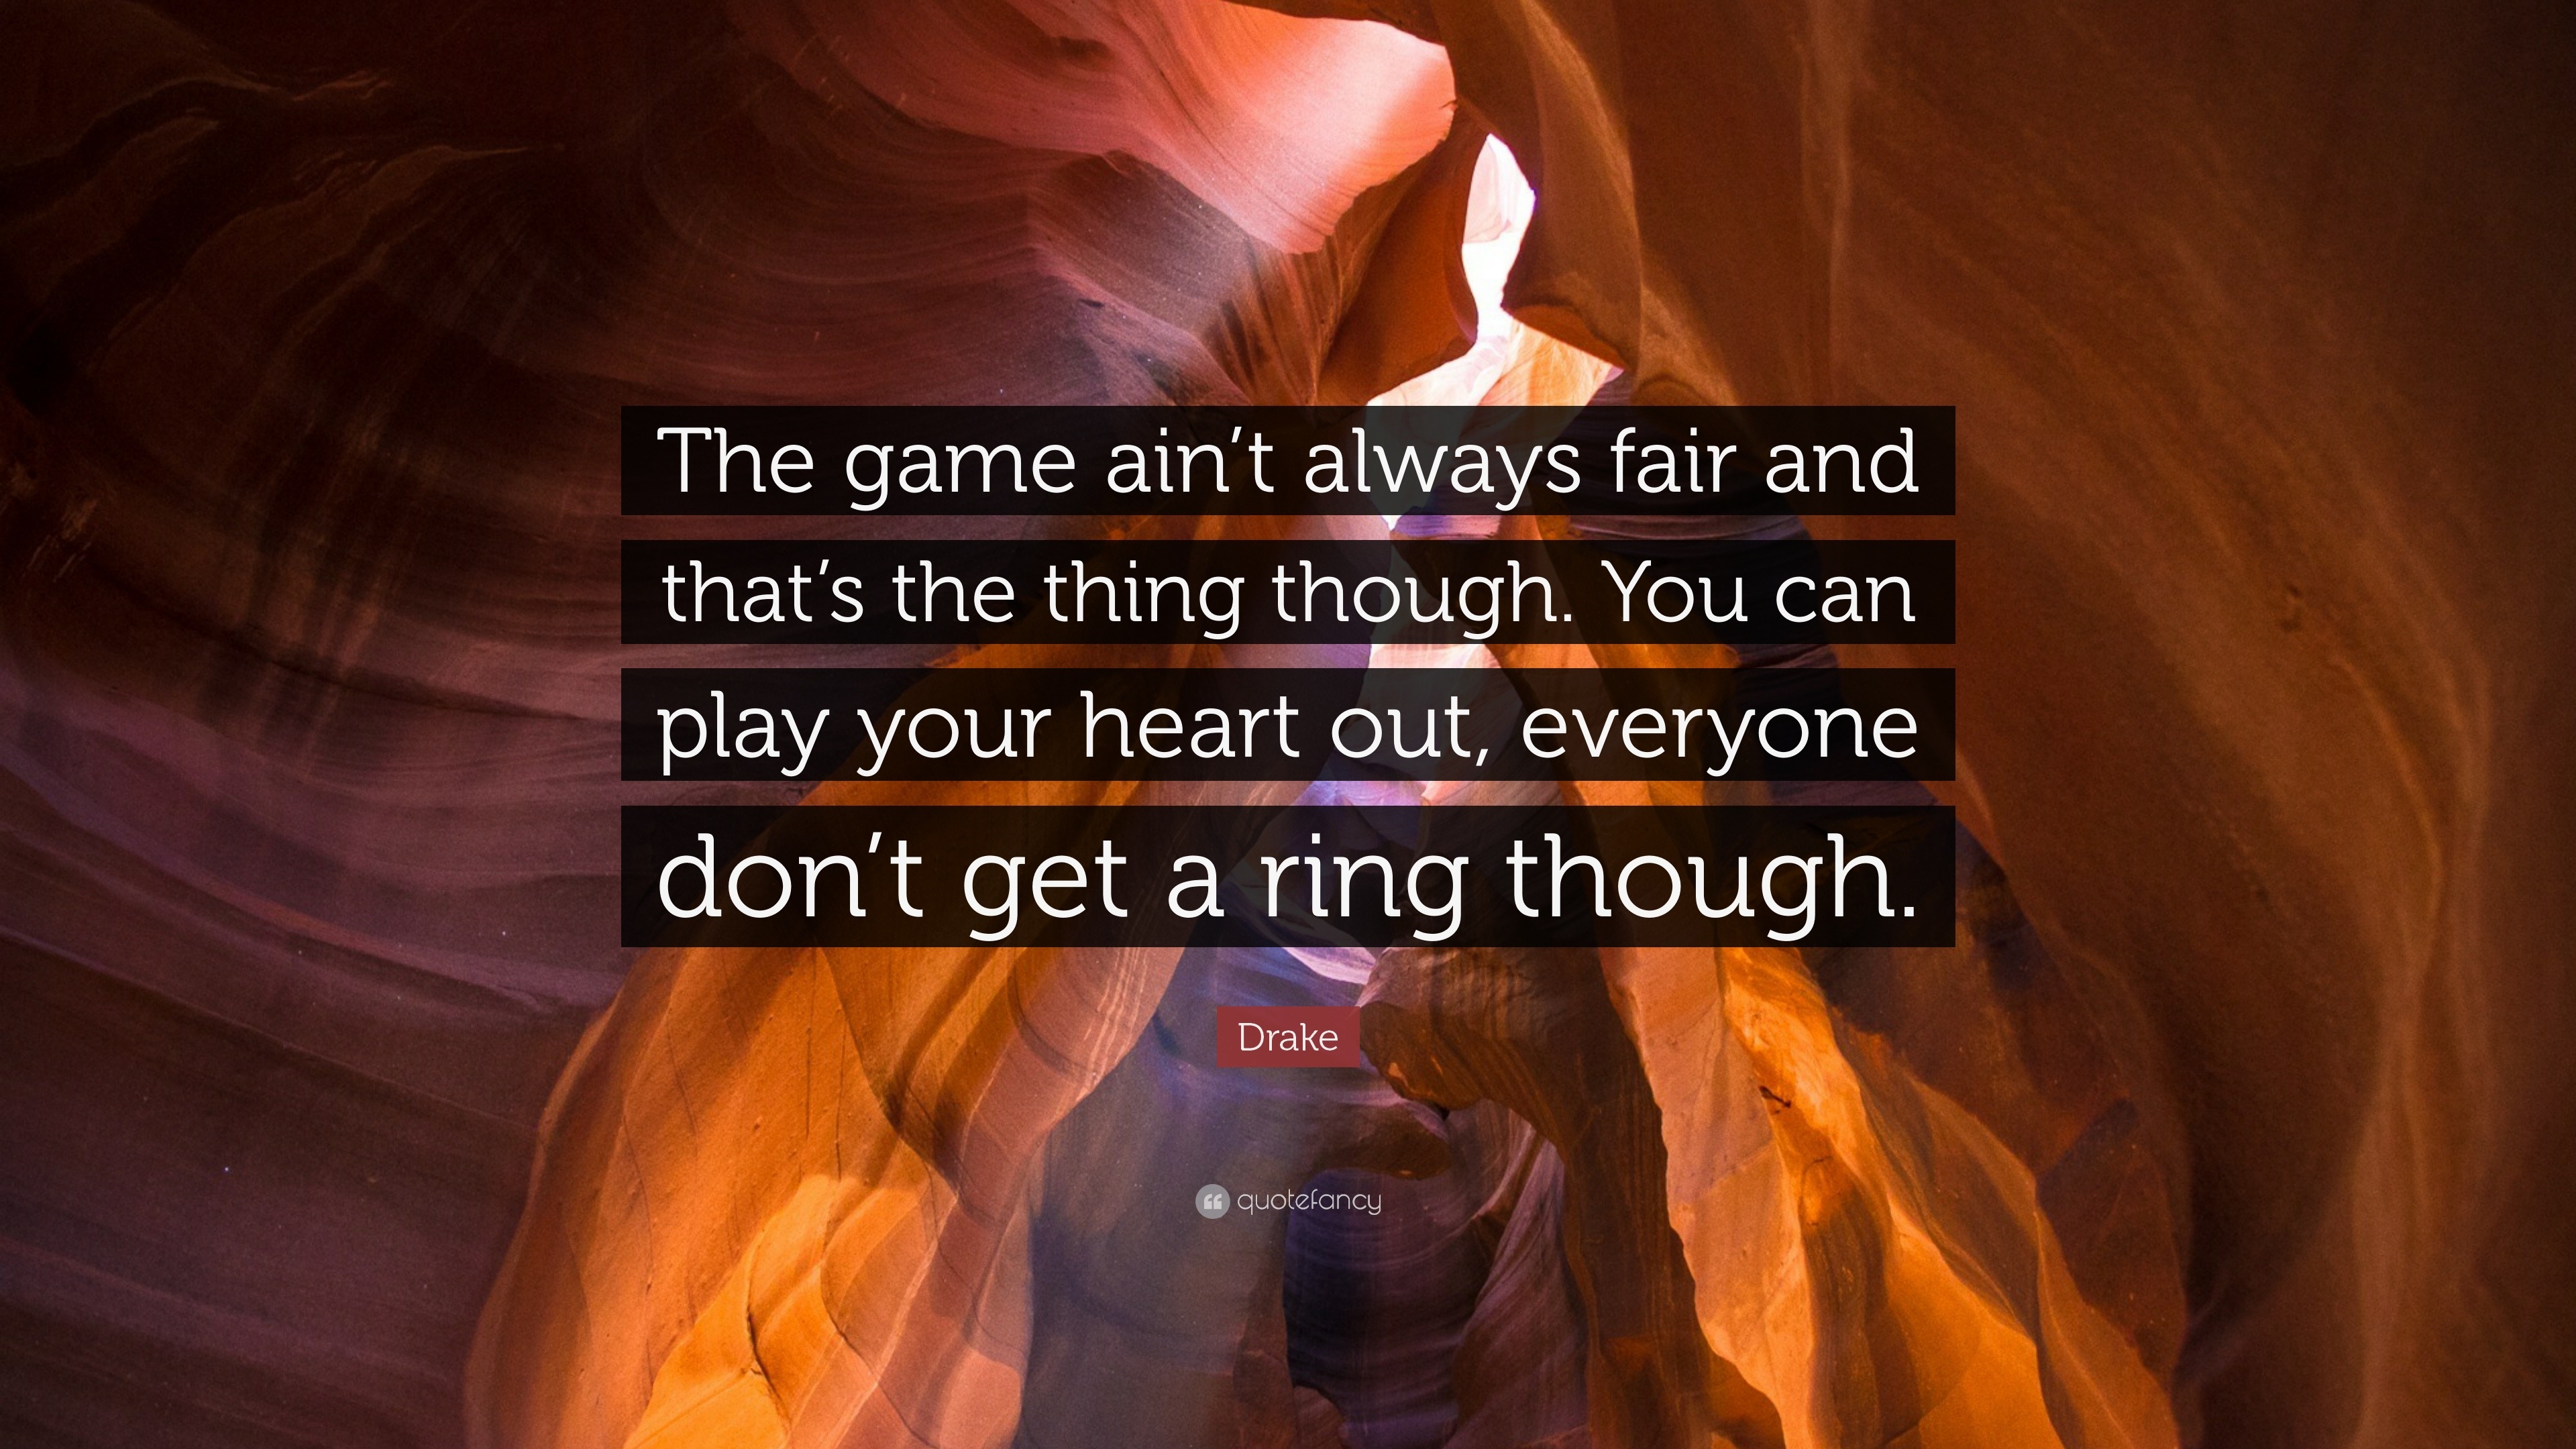 Quit playing games with my heart  Drake quotes, Inspirational quotes, Words